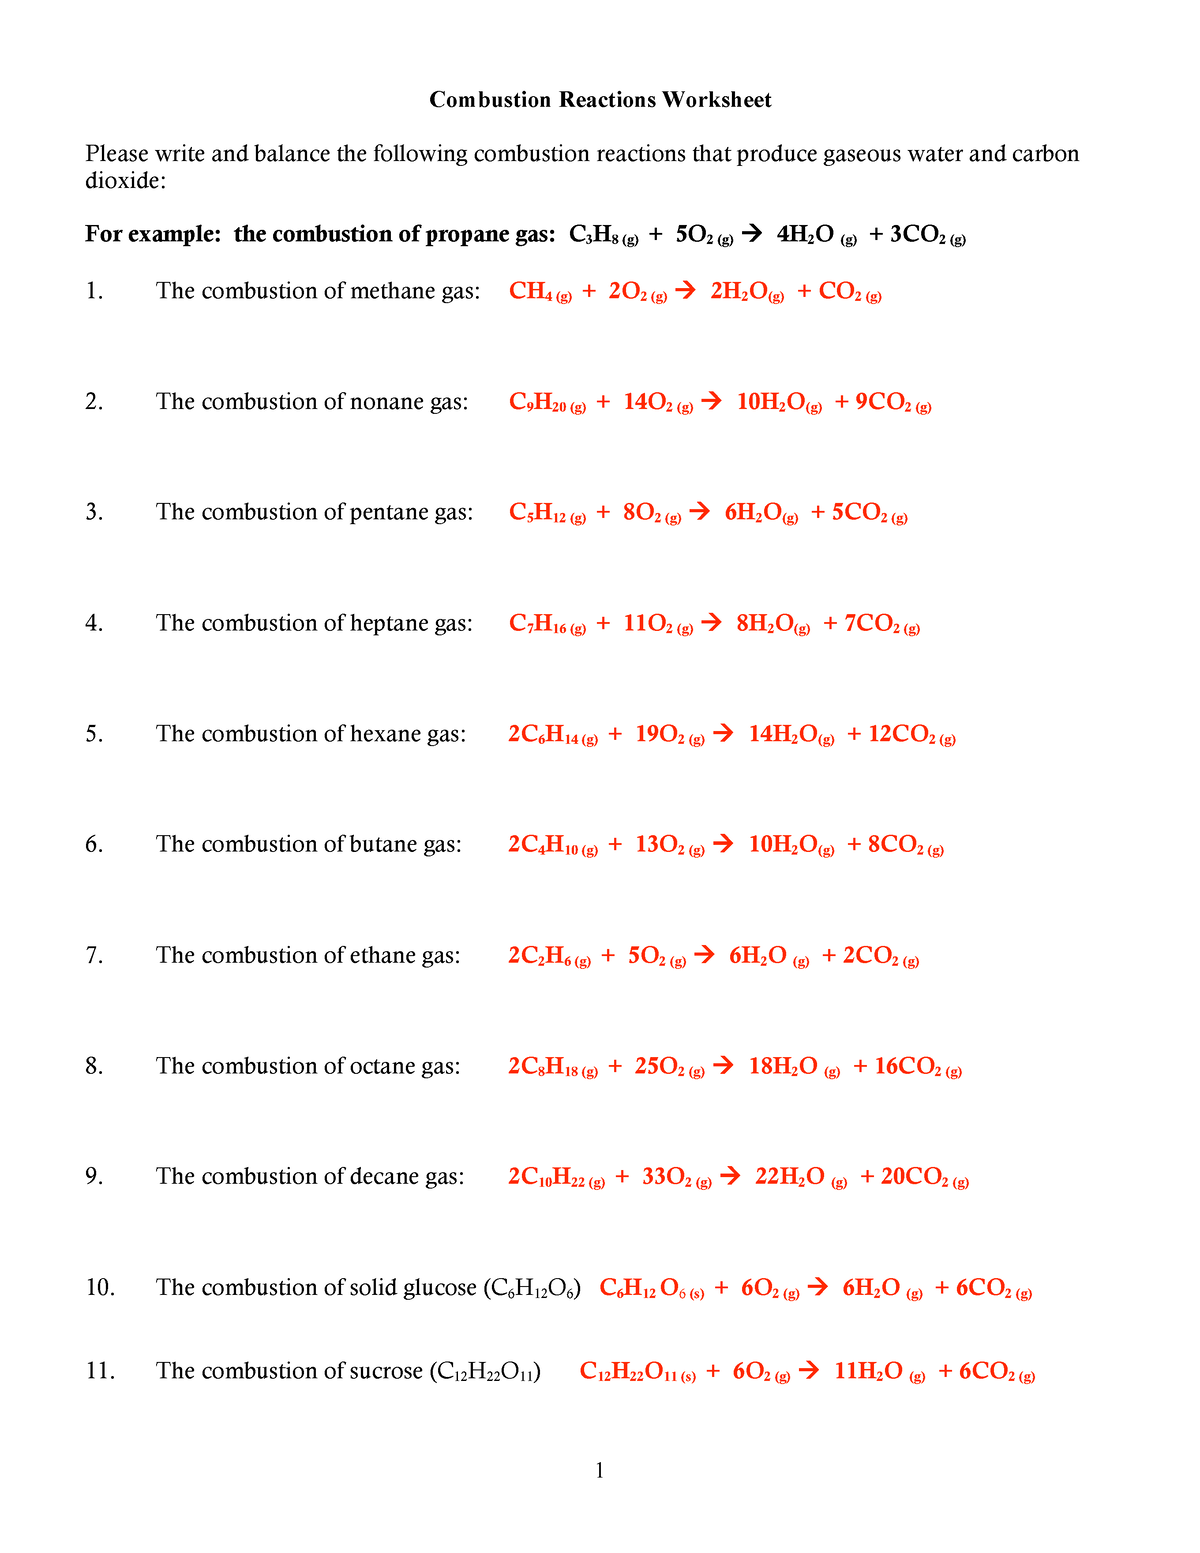 240-more-combustion-worksheets-combustion-reactions-worksheet-please-write-and-balance-the